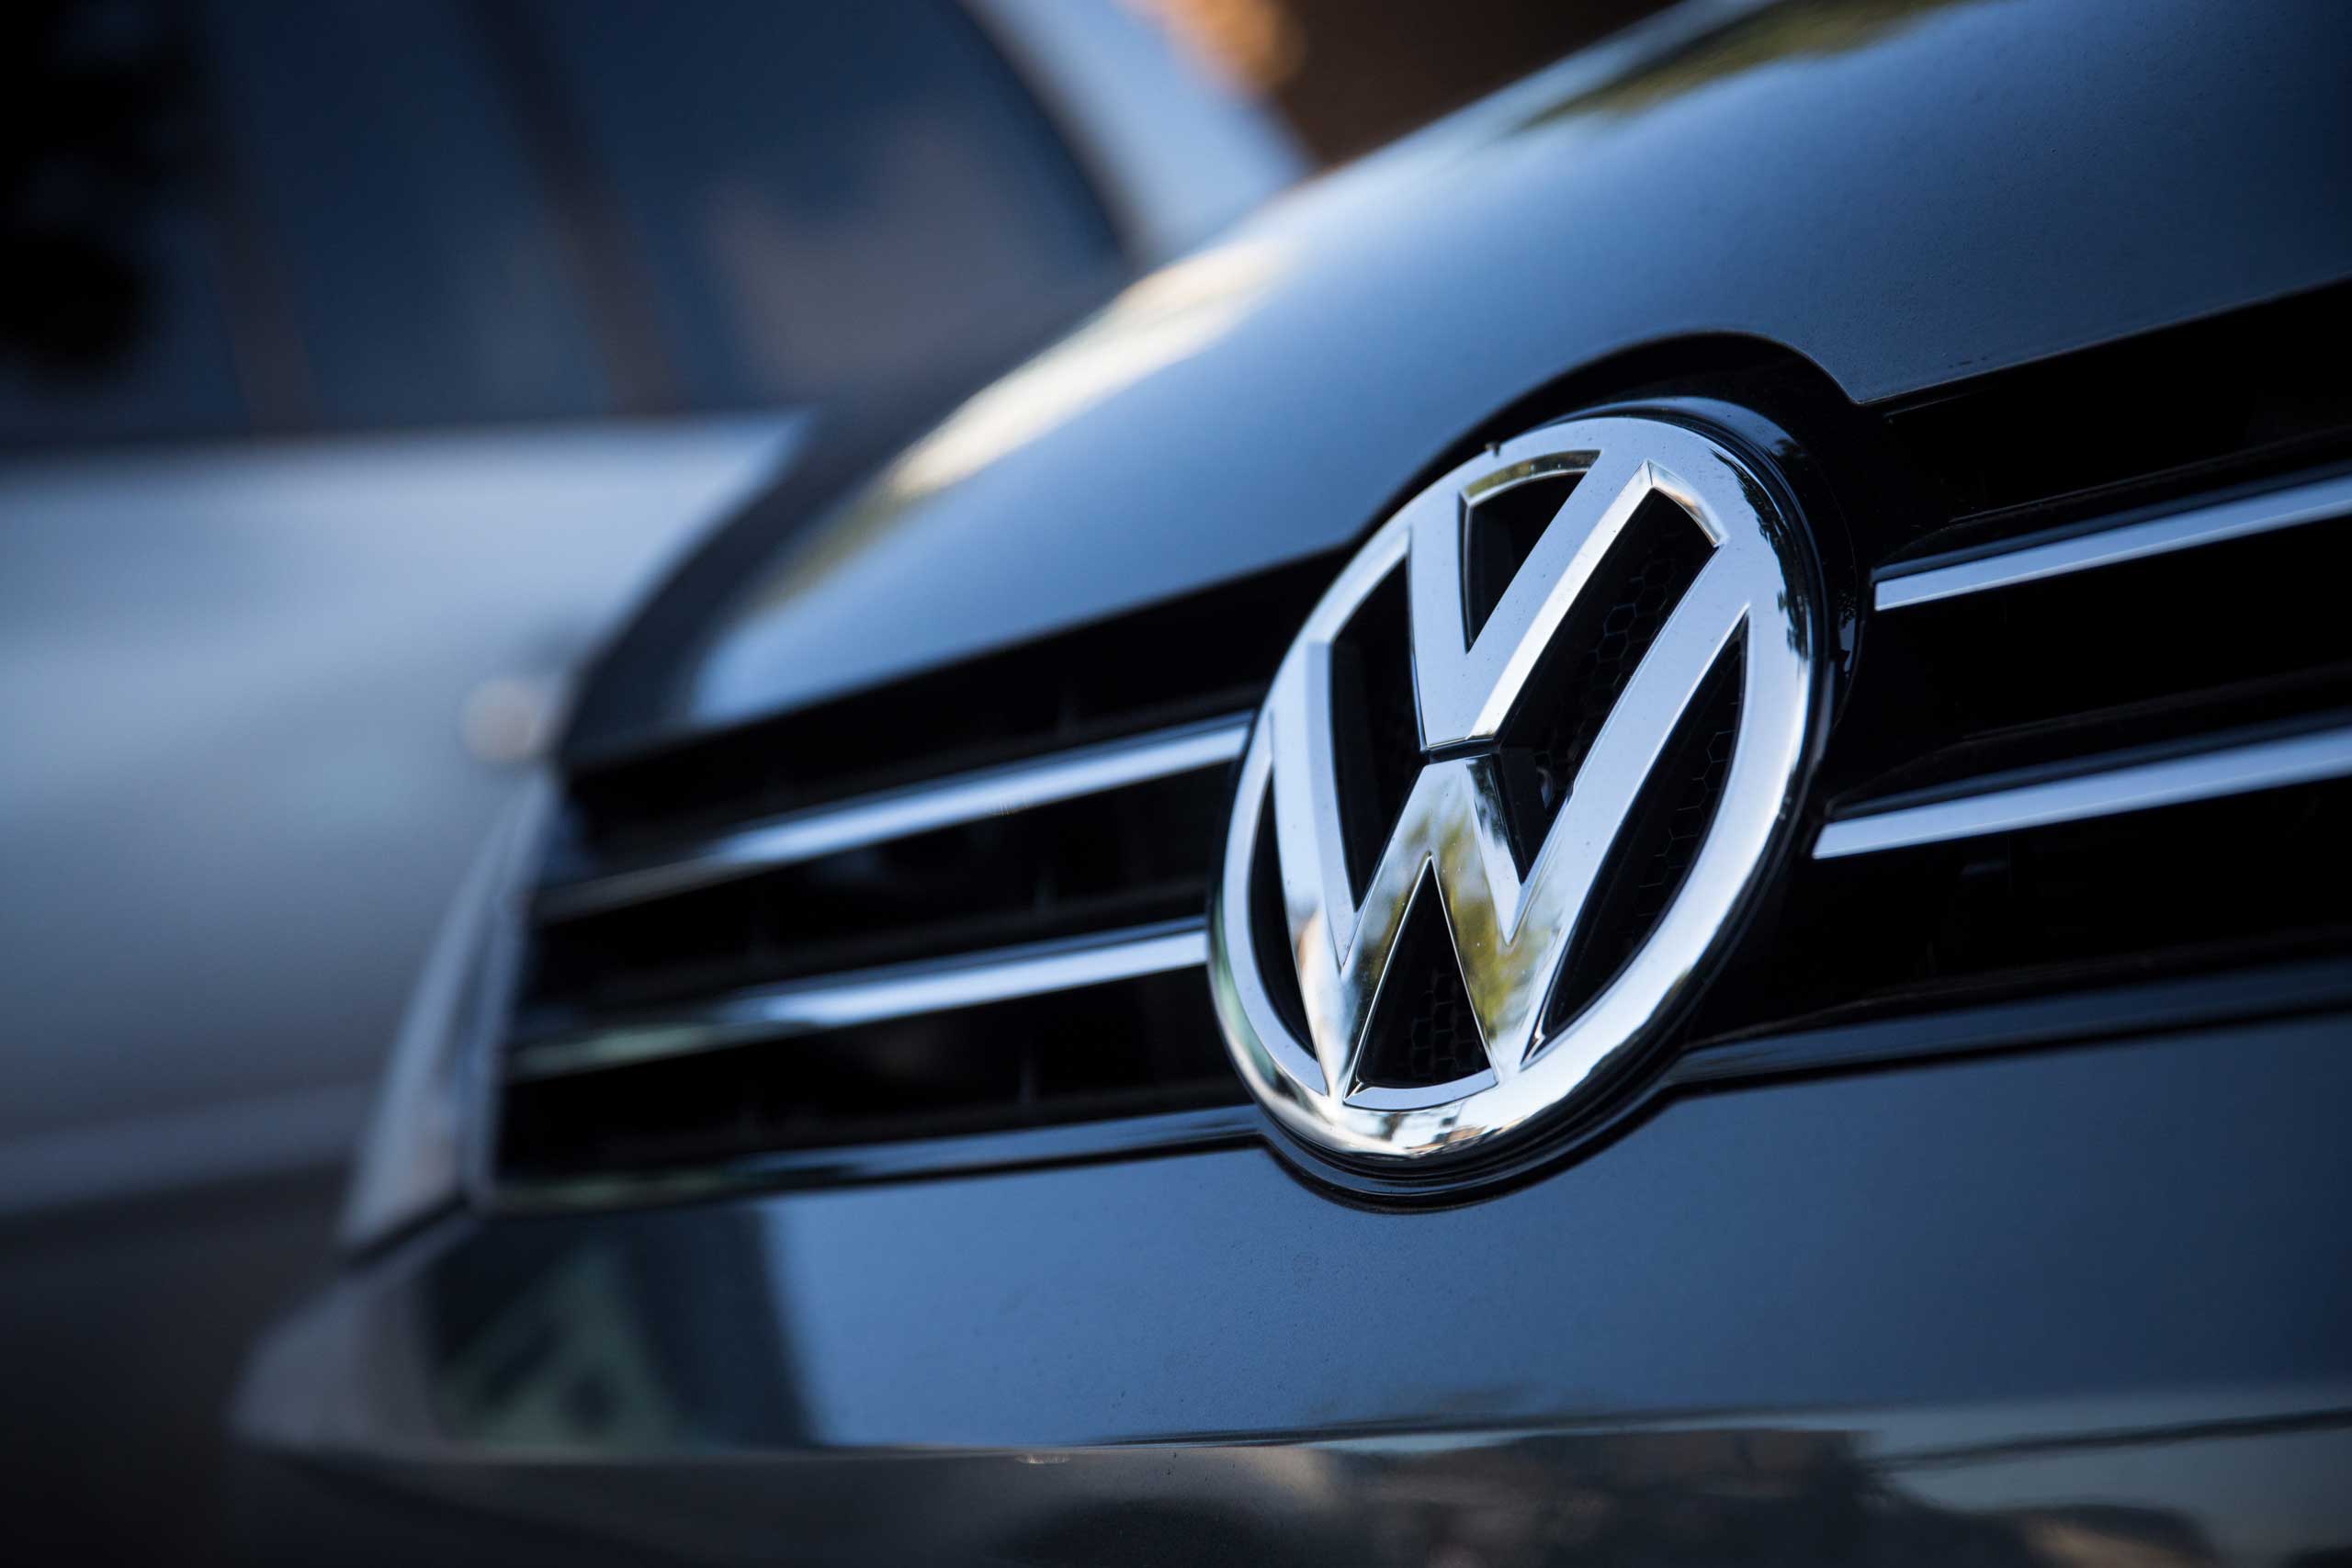 Used cars by German manufacturer Volkswagen are parked at a dealership in London, on Sept. 25, 2015 (Rob Stothard—Getty Images)